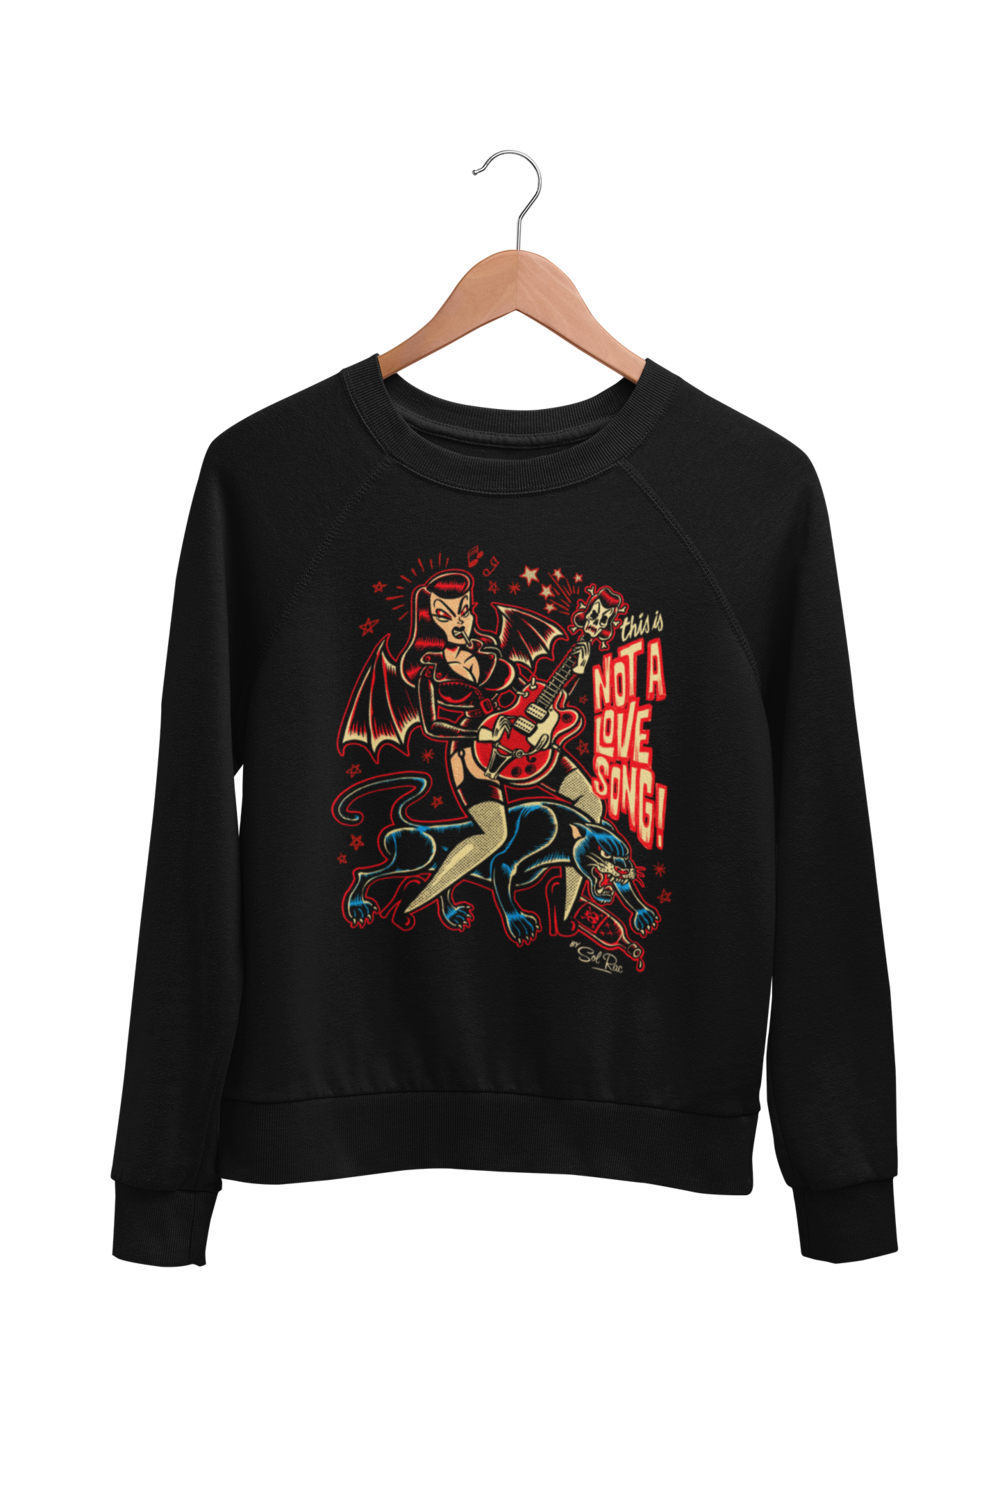 THIS IS NOT A LOVE SONG SWEATSHIRT UNISEX by BY SOL RAC